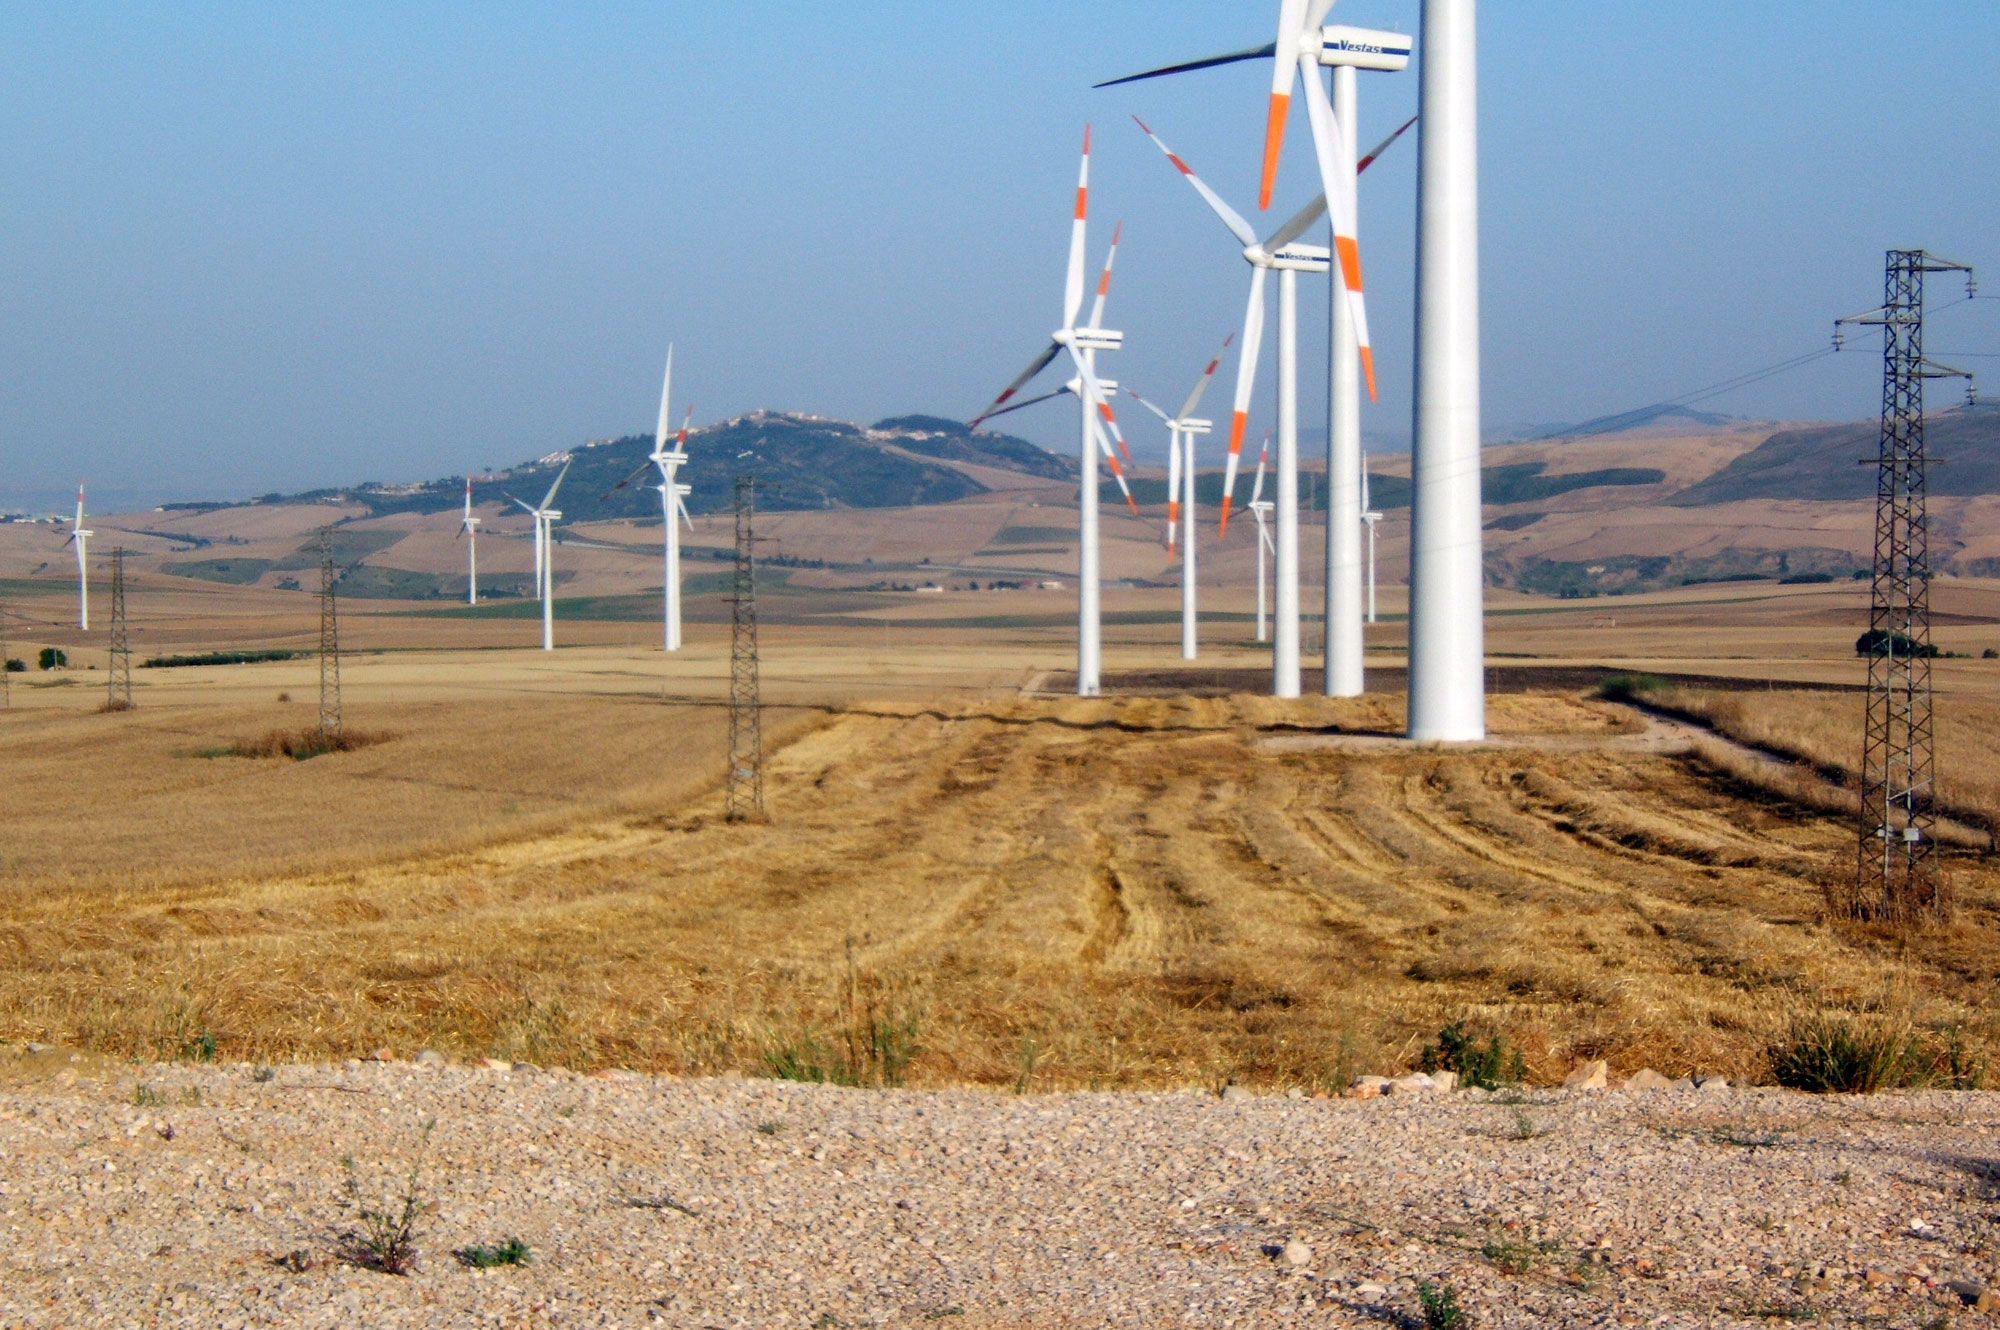 Wind Farms in the Regions of Apulia and Sicily